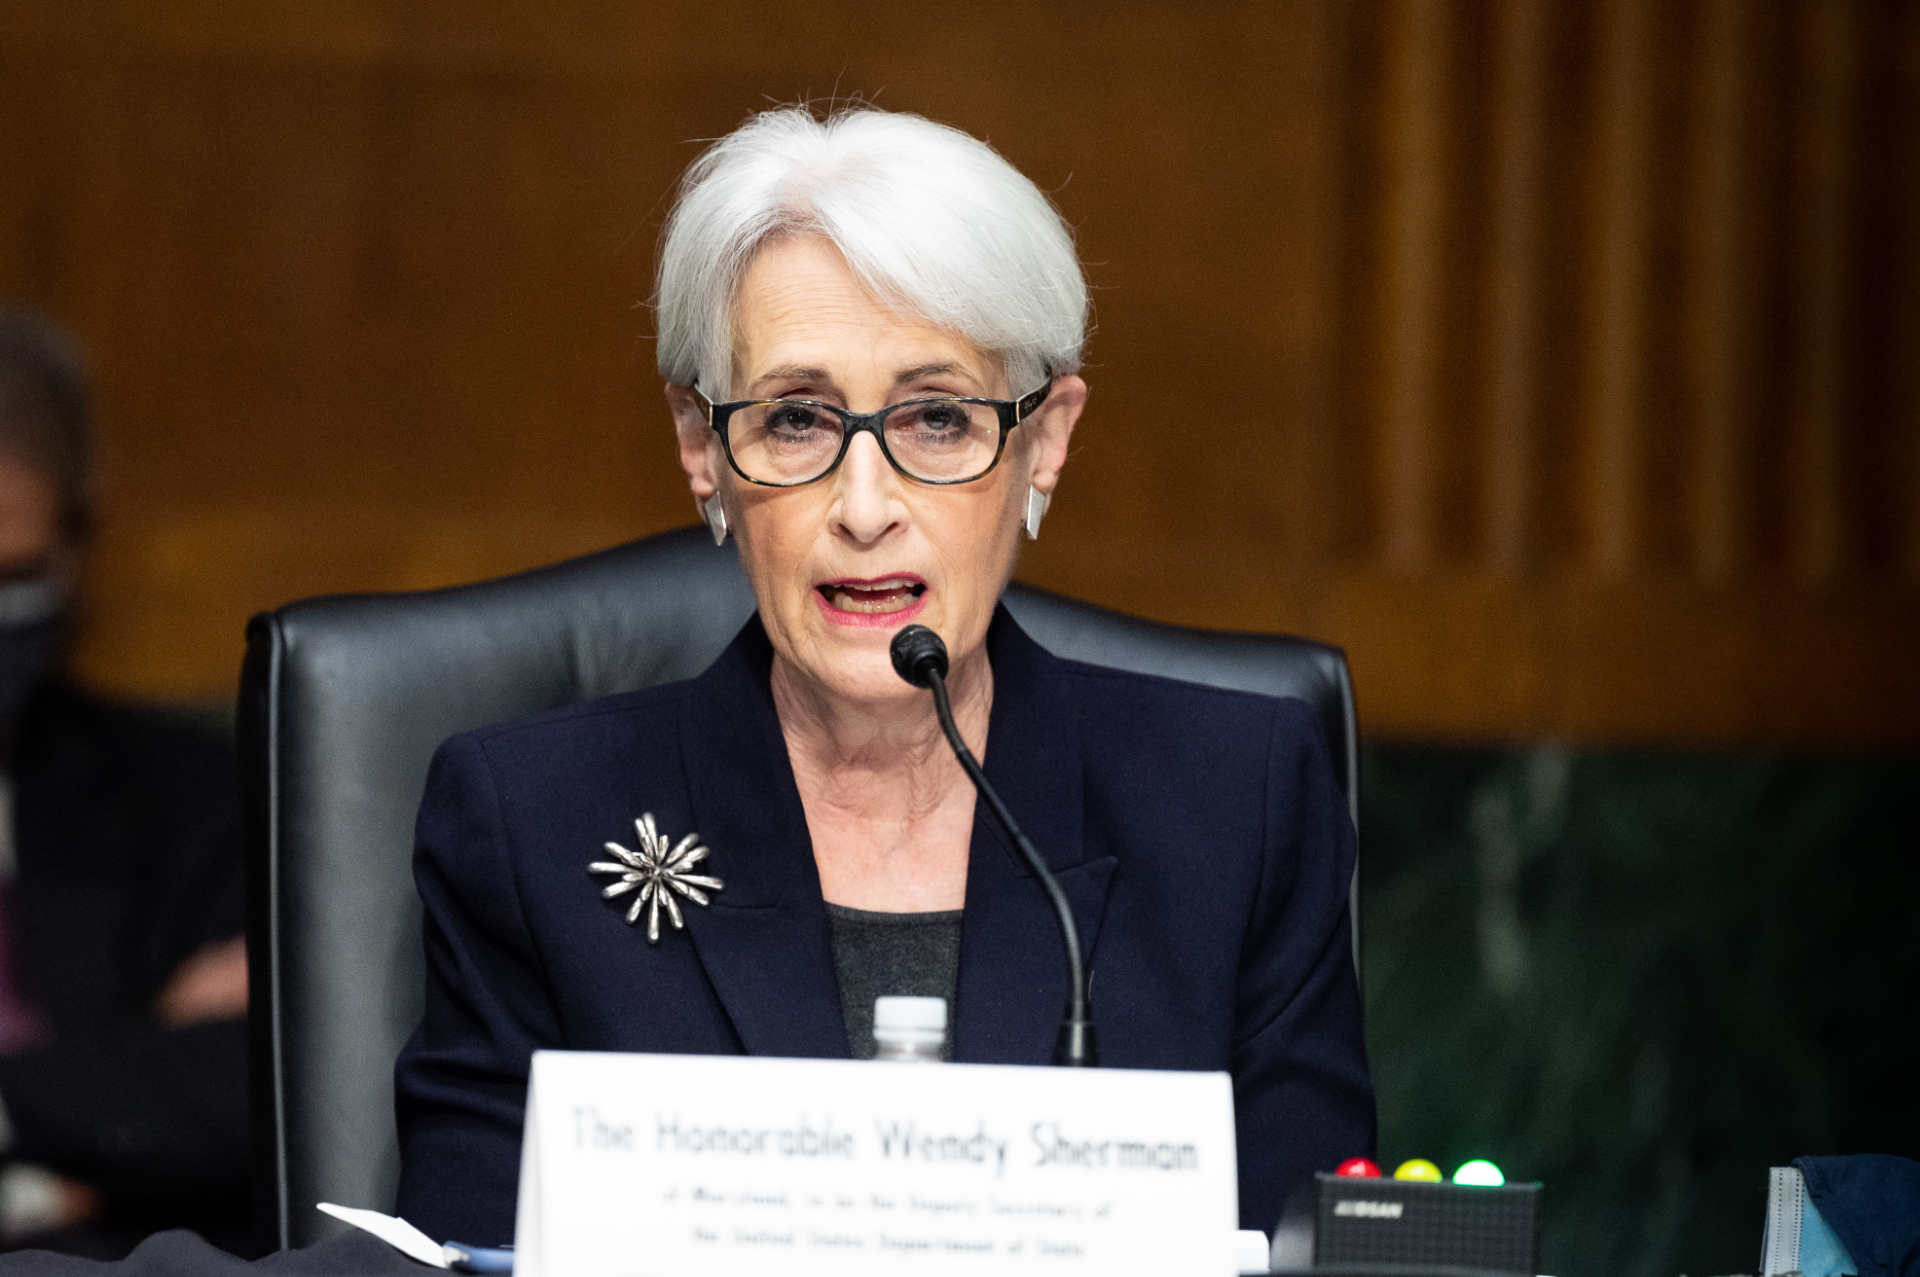 Wendy Sherman at a U.S. Senate hearing in March 2021